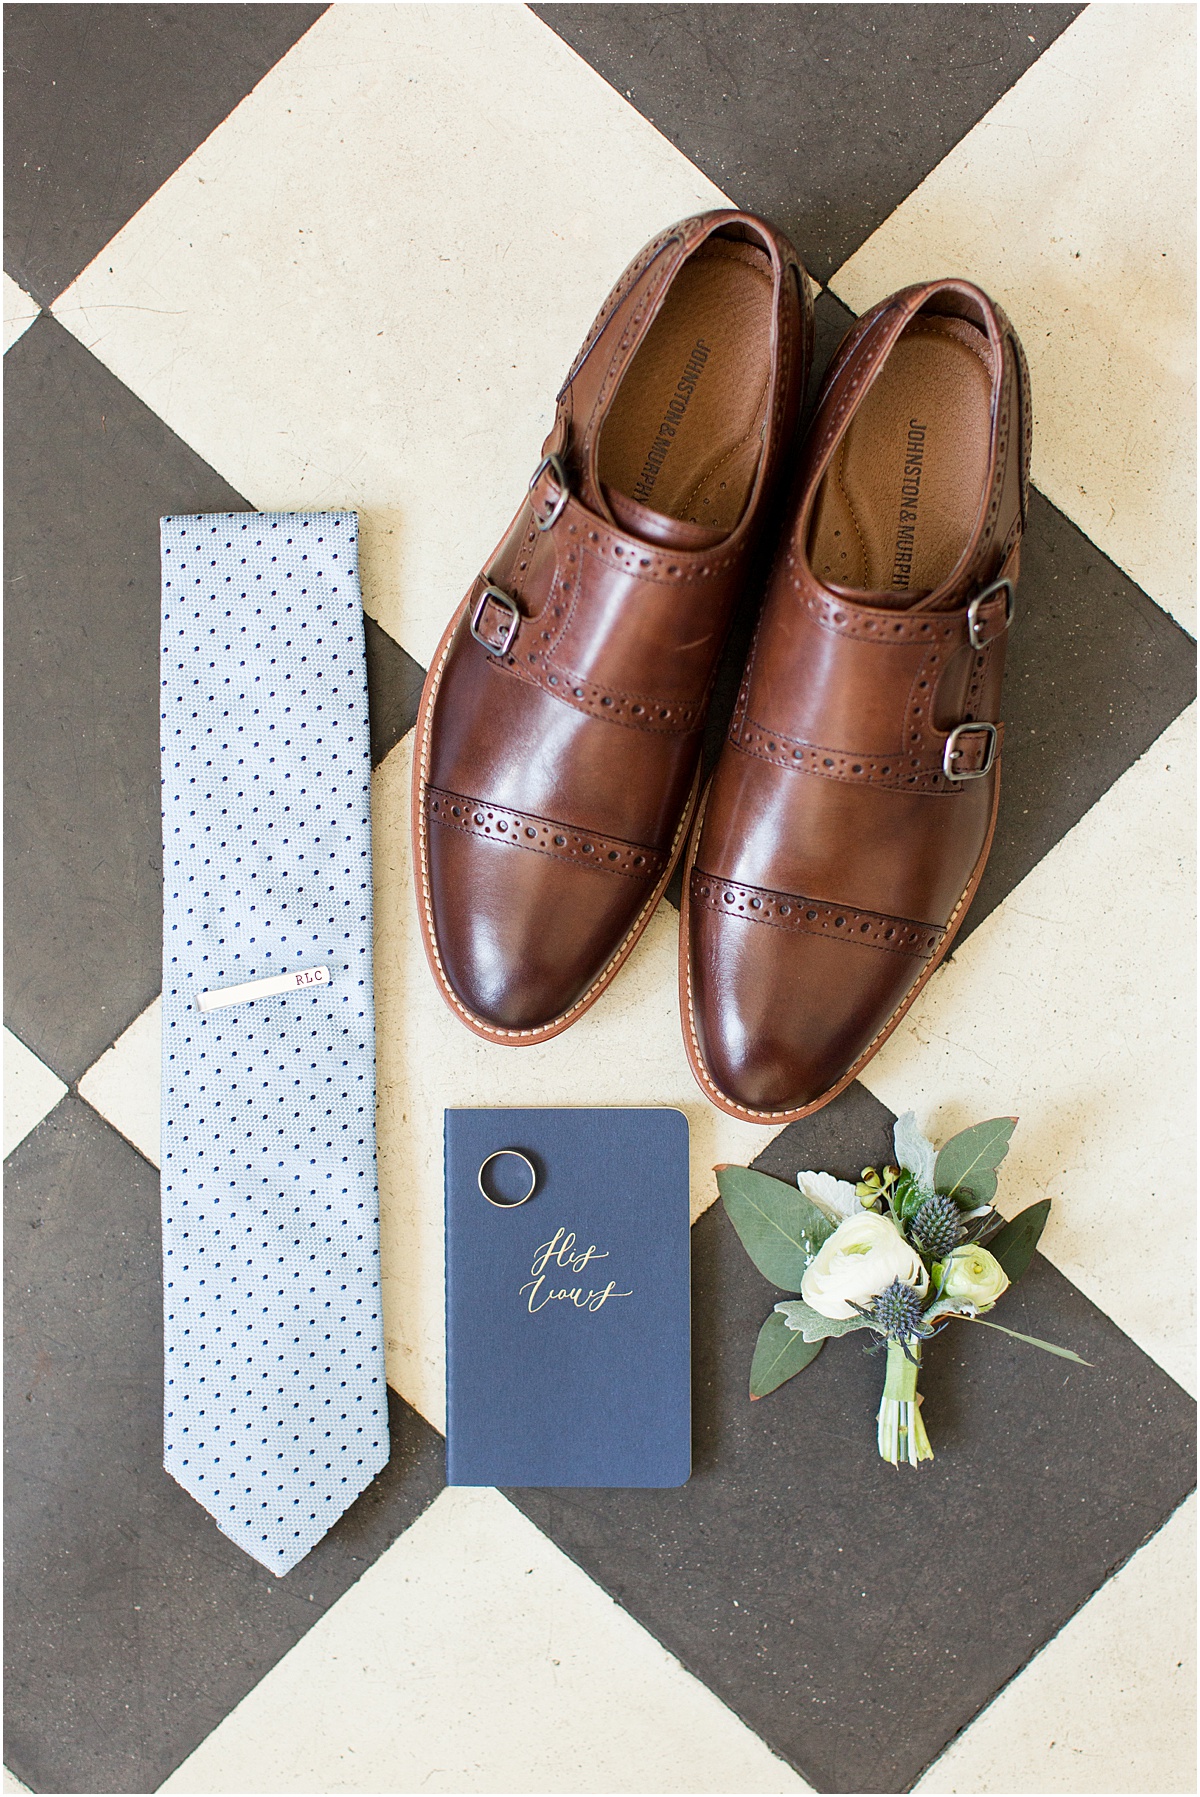 Brown leather shoes with blue tie, silver tie clip and blue vow book in flatlay style